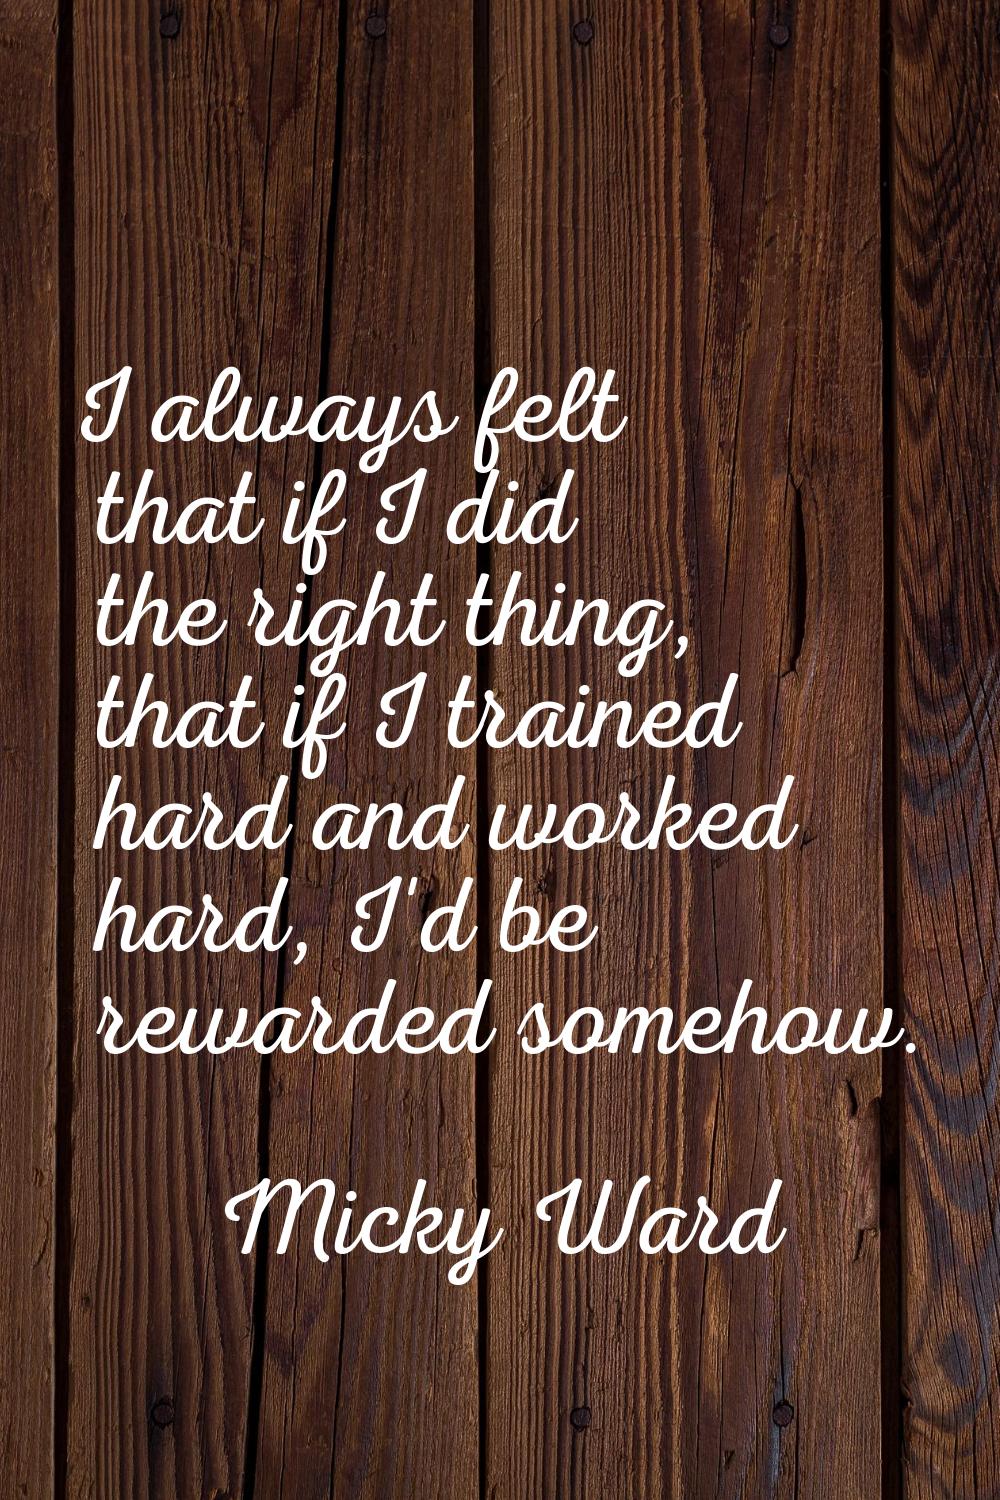 I always felt that if I did the right thing, that if I trained hard and worked hard, I'd be rewarde